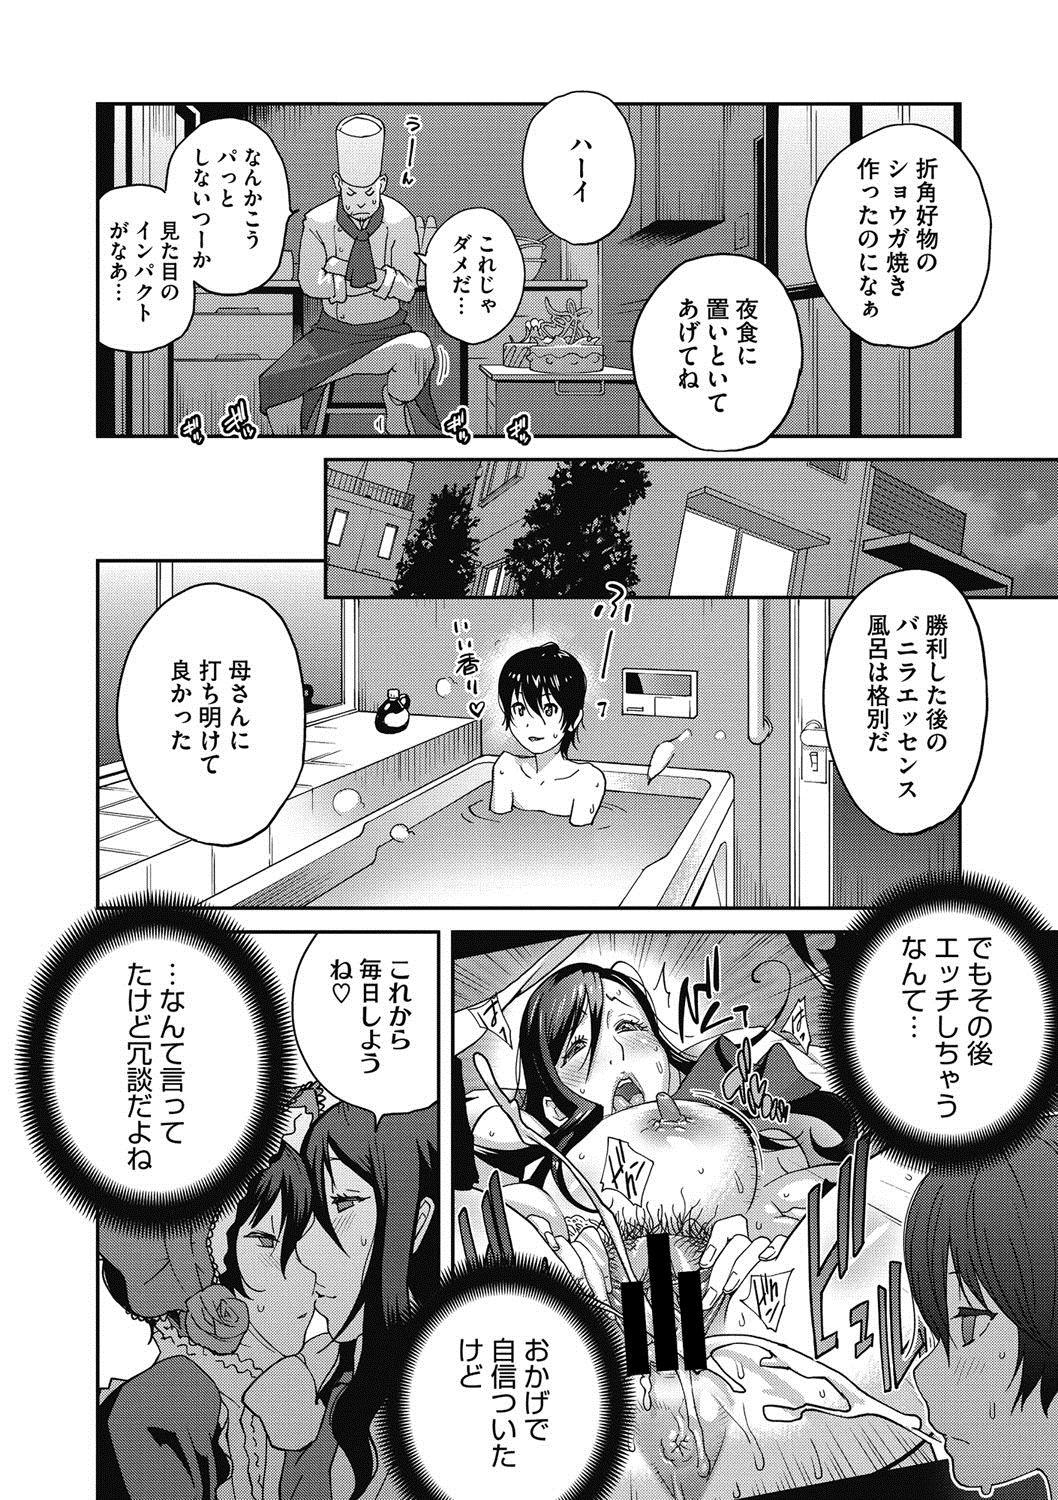 [Kotoyoshi Yumisuke] Haha to Ane to Aoi Ichigo no Fromage - Fromage of mother and an older sister and a blue strawberry Ch. 1-3 23